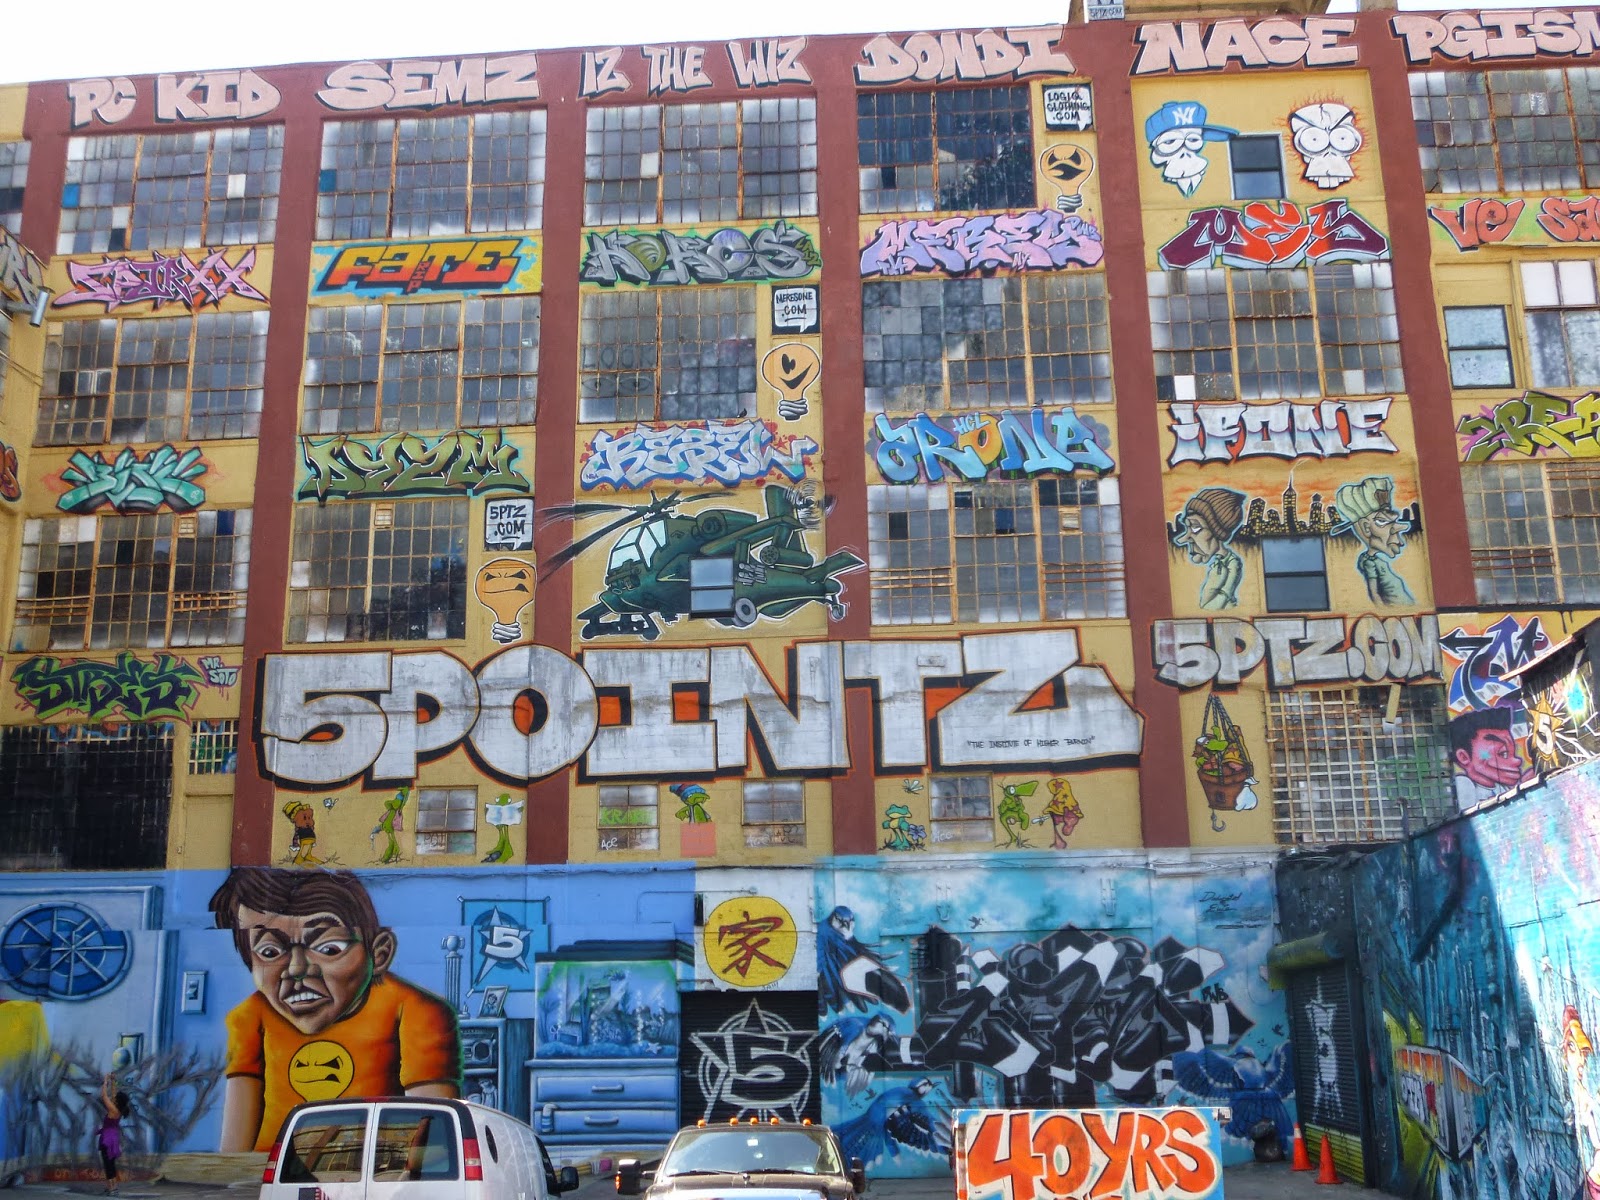 Juzzy S Blog The Whole 9 Yards グラフィティの聖地 5 Pointz